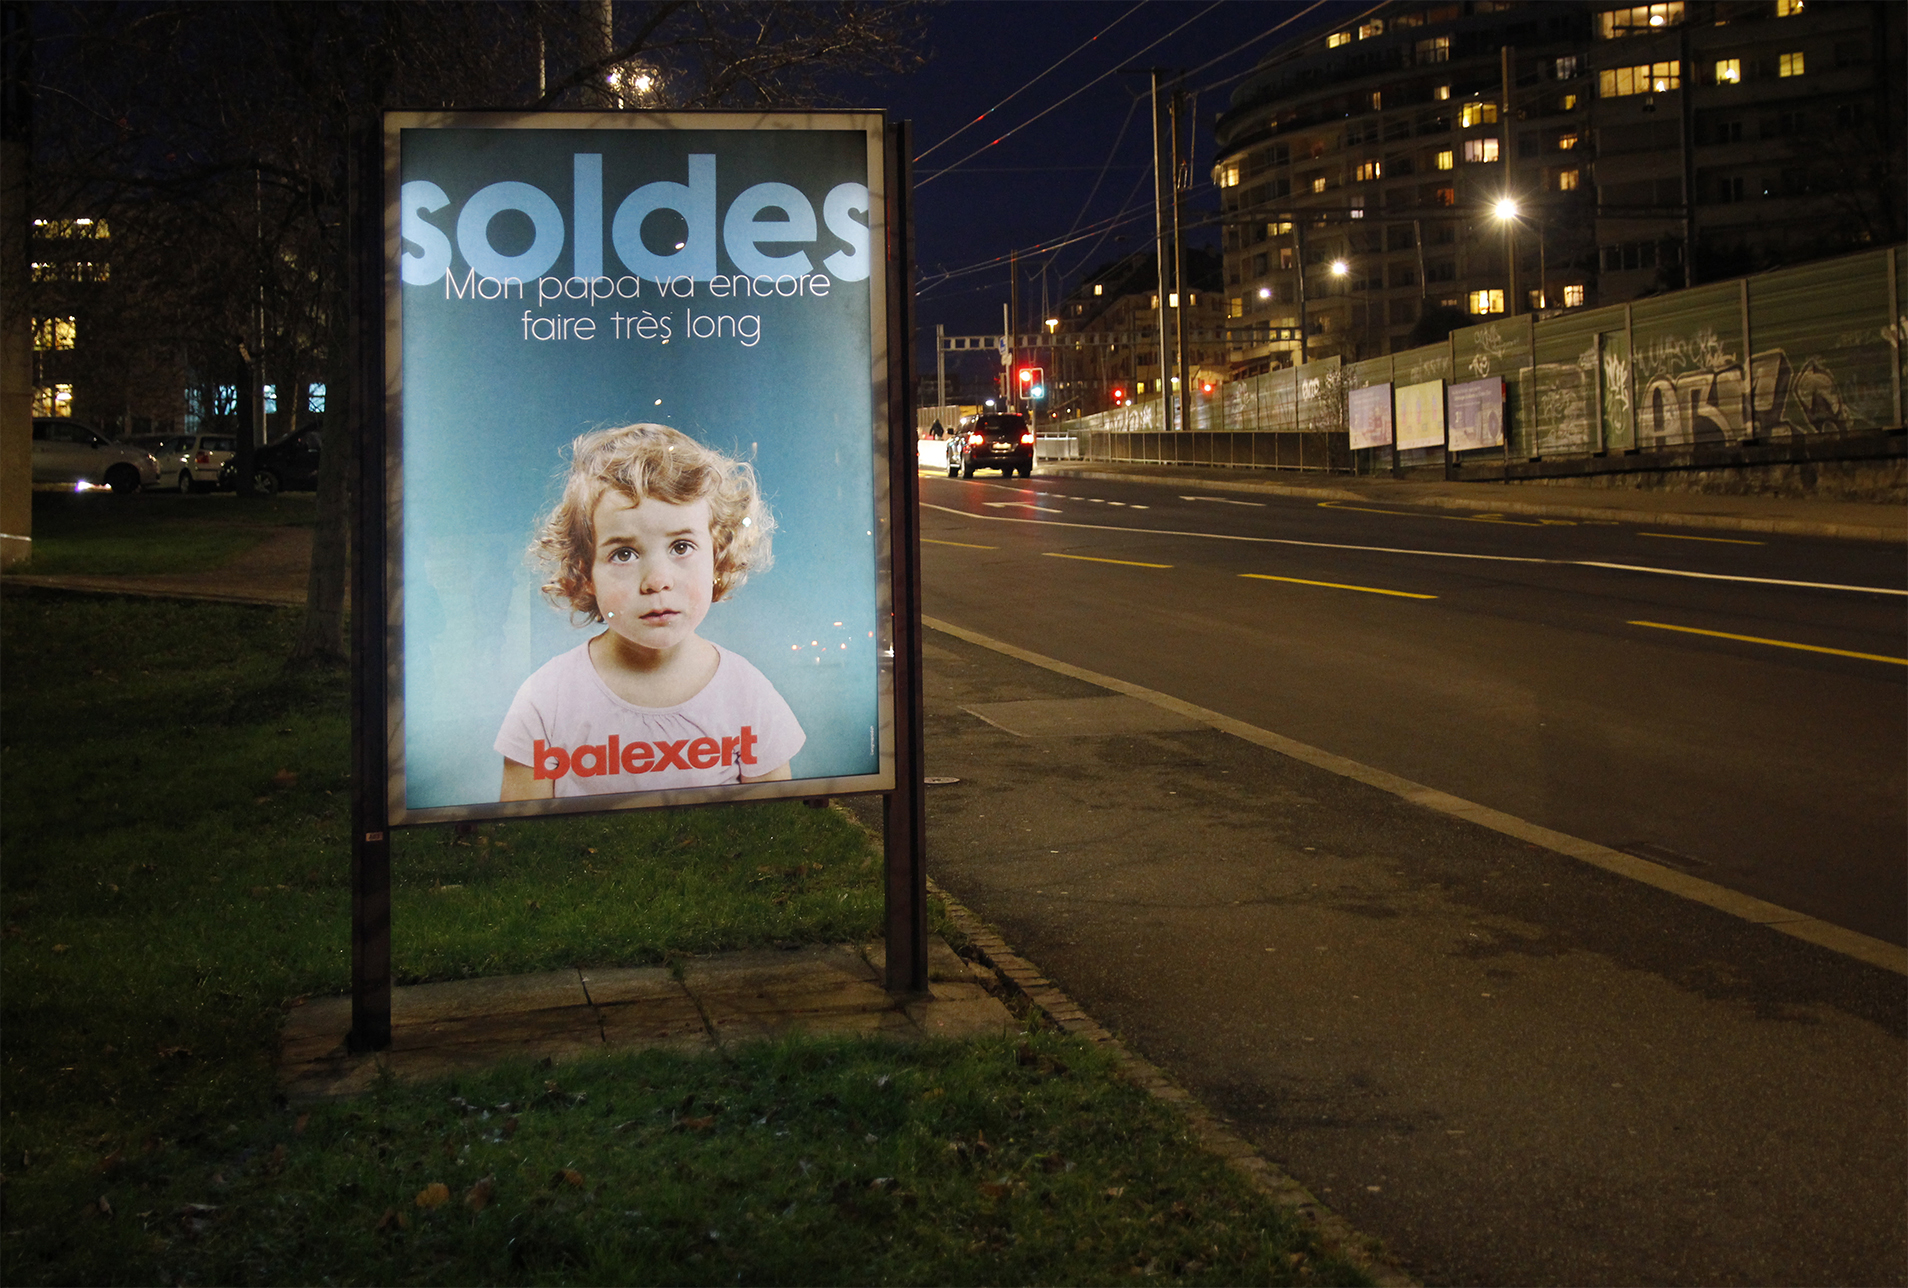 Display of the second poster of the print advertising campaign in the streets by night